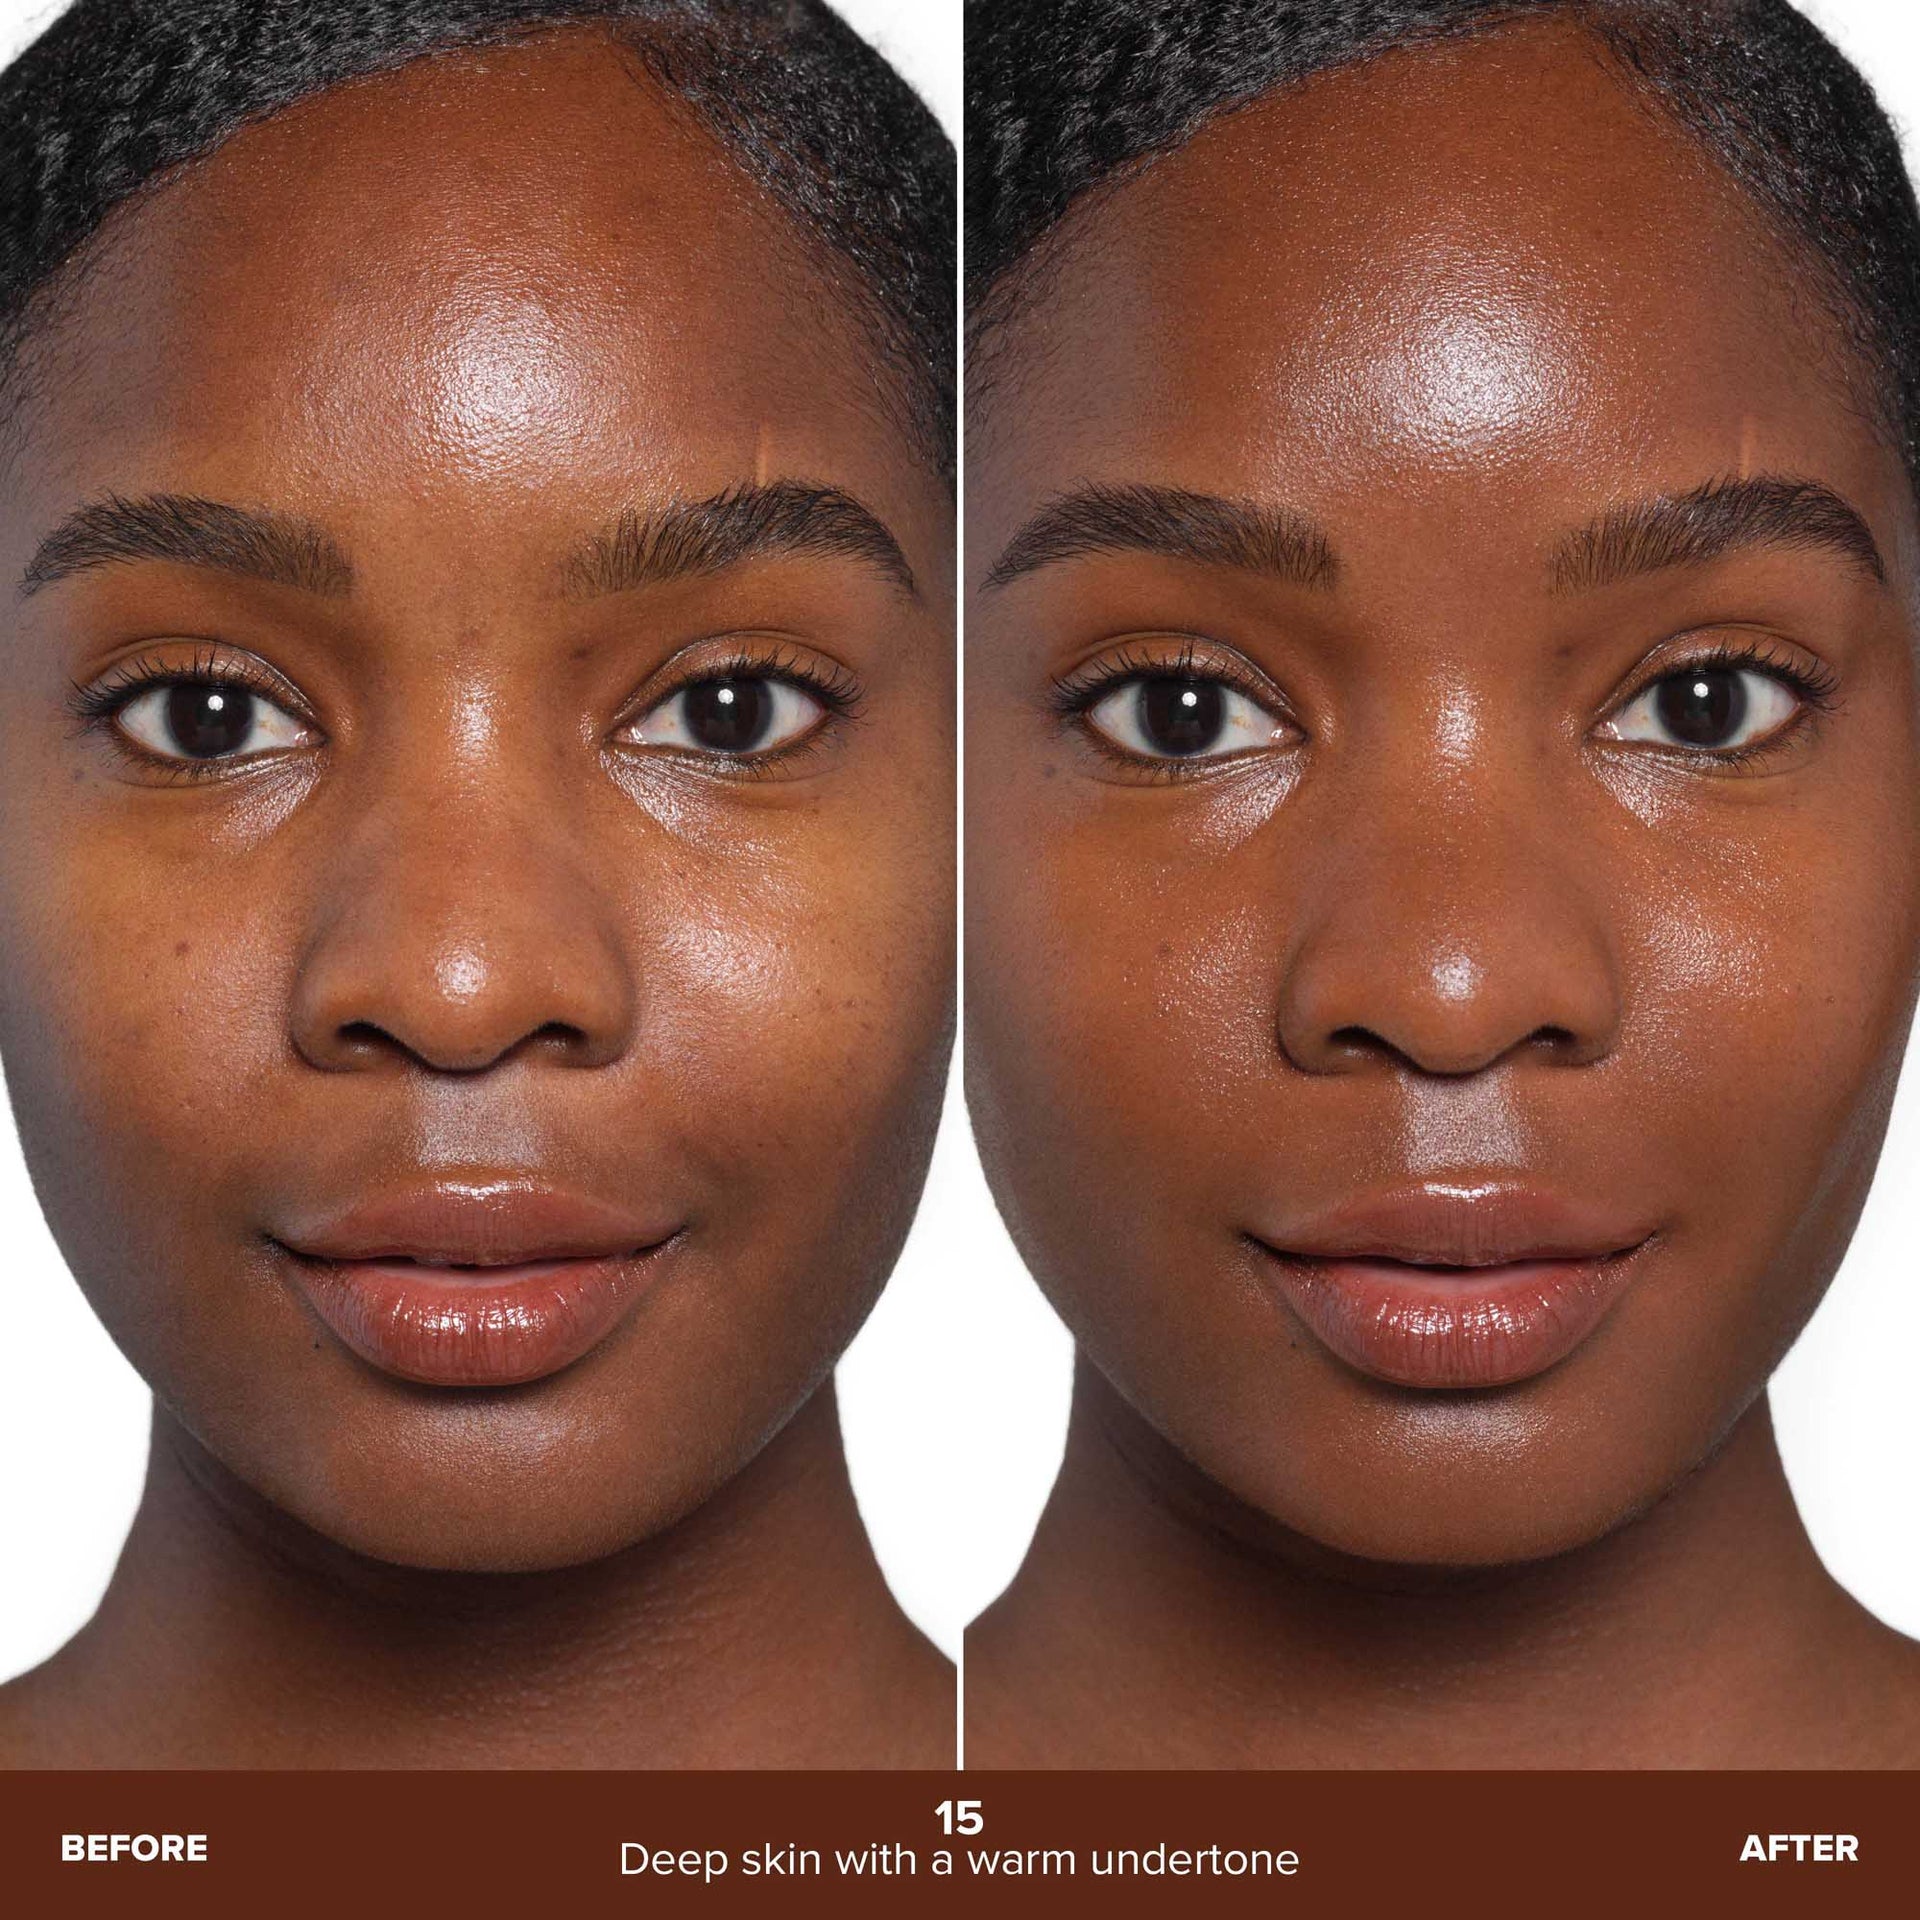 Shade 15 | Beauty Balm Serum Boosted Skin Tint Before & After - Shade 15